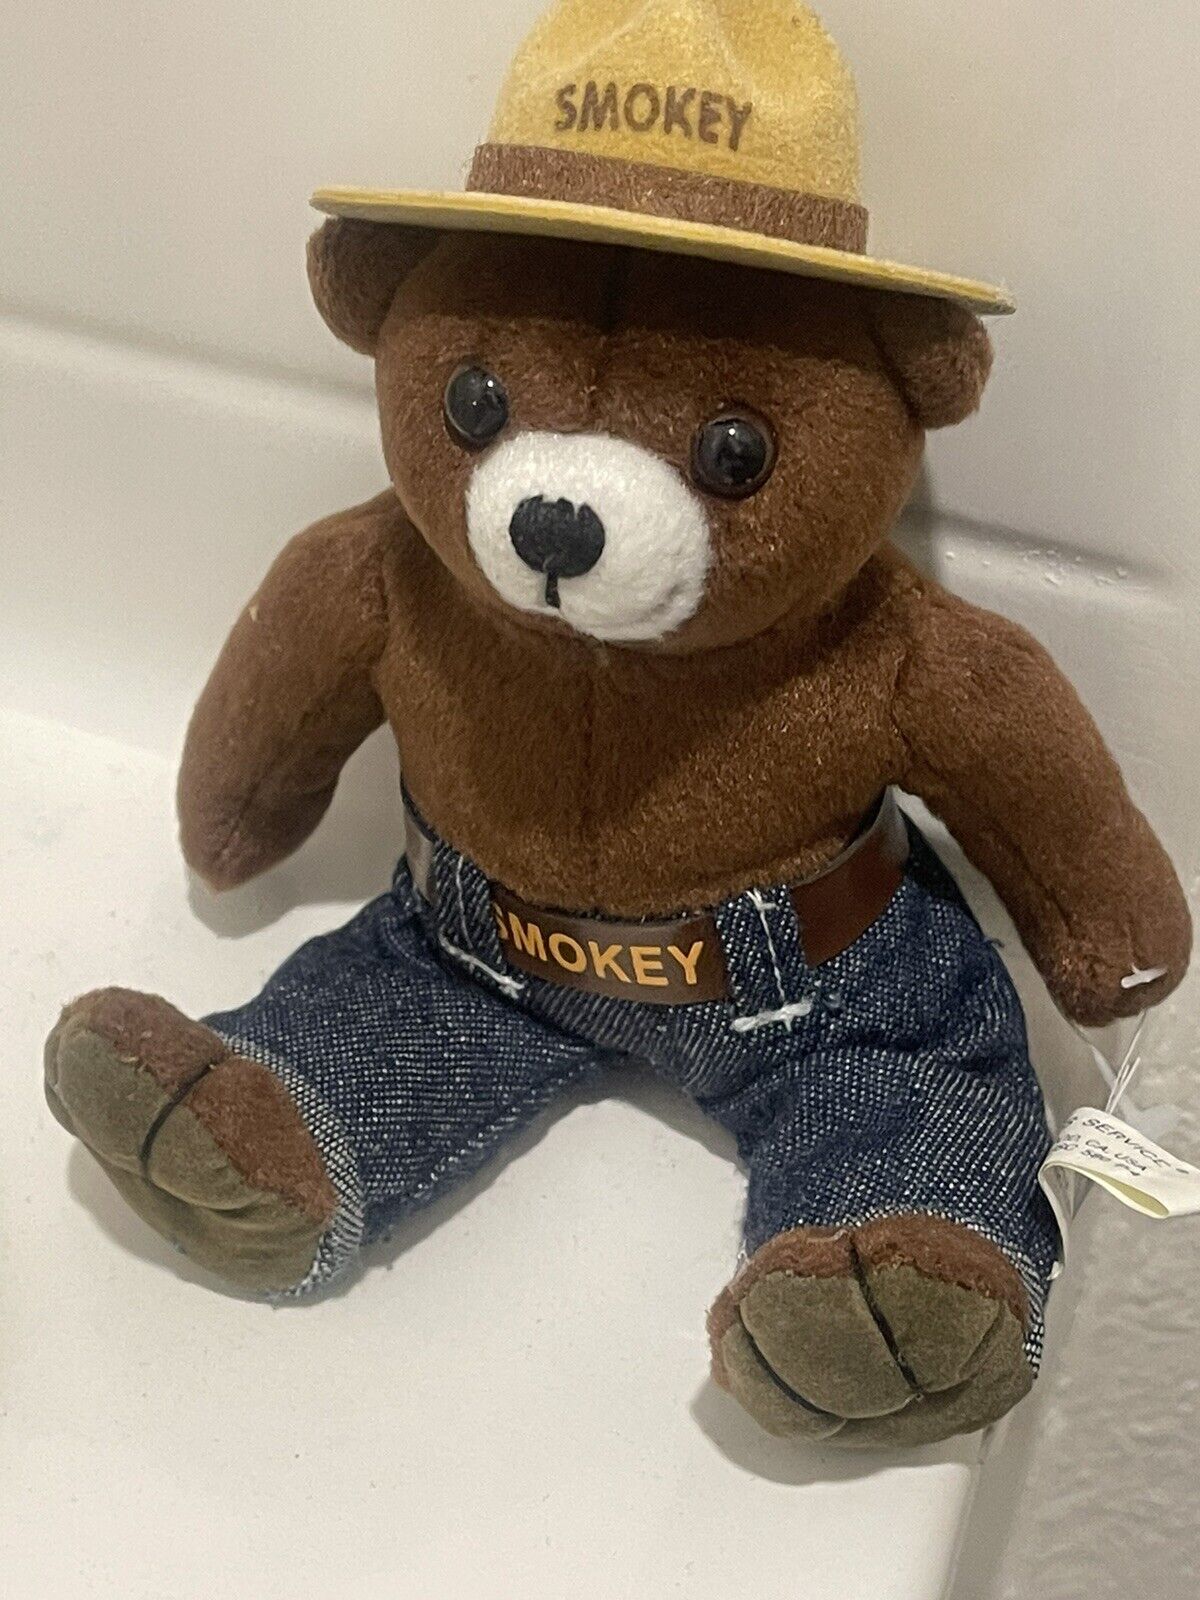 New Still In Wrapping Classic Smokey the Bear Collectible Plush 7 inch Only You